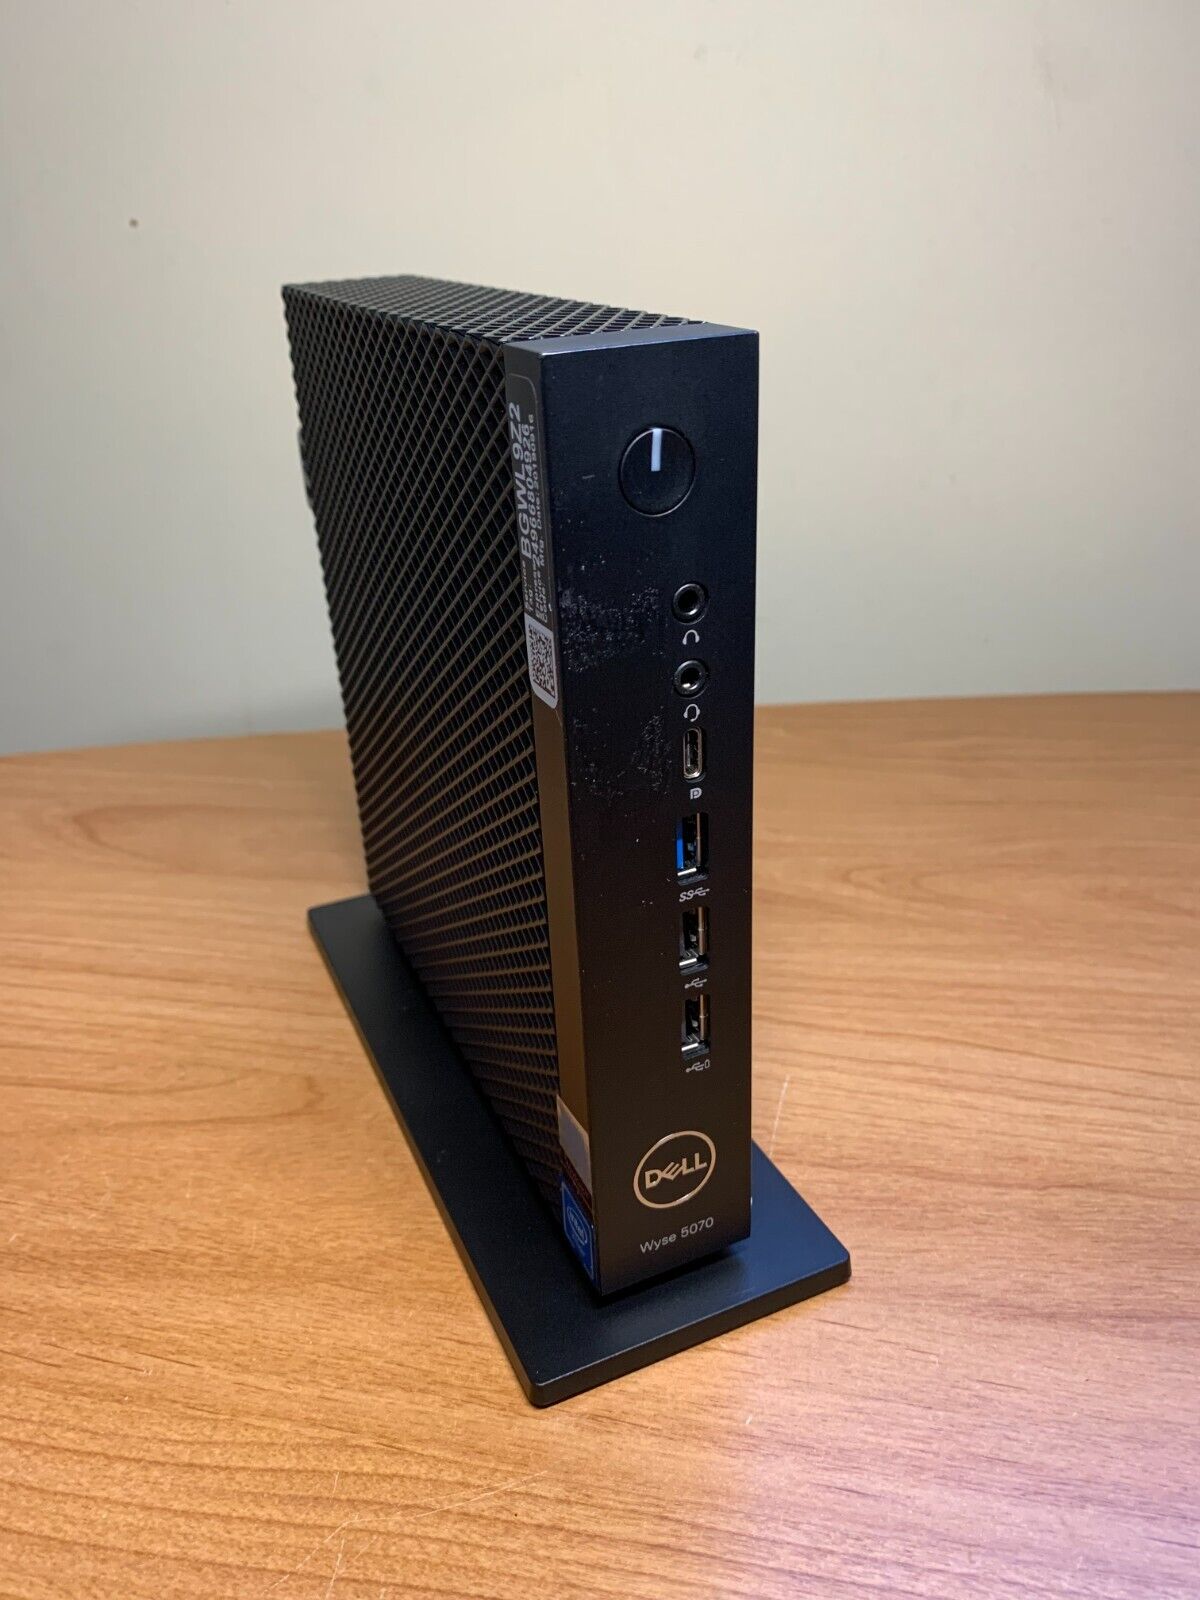 Dell WYSE 5070 Thin Client N11D001 1.5GHz CPU 8G RAM 32GB EMMC - Boot to Windows